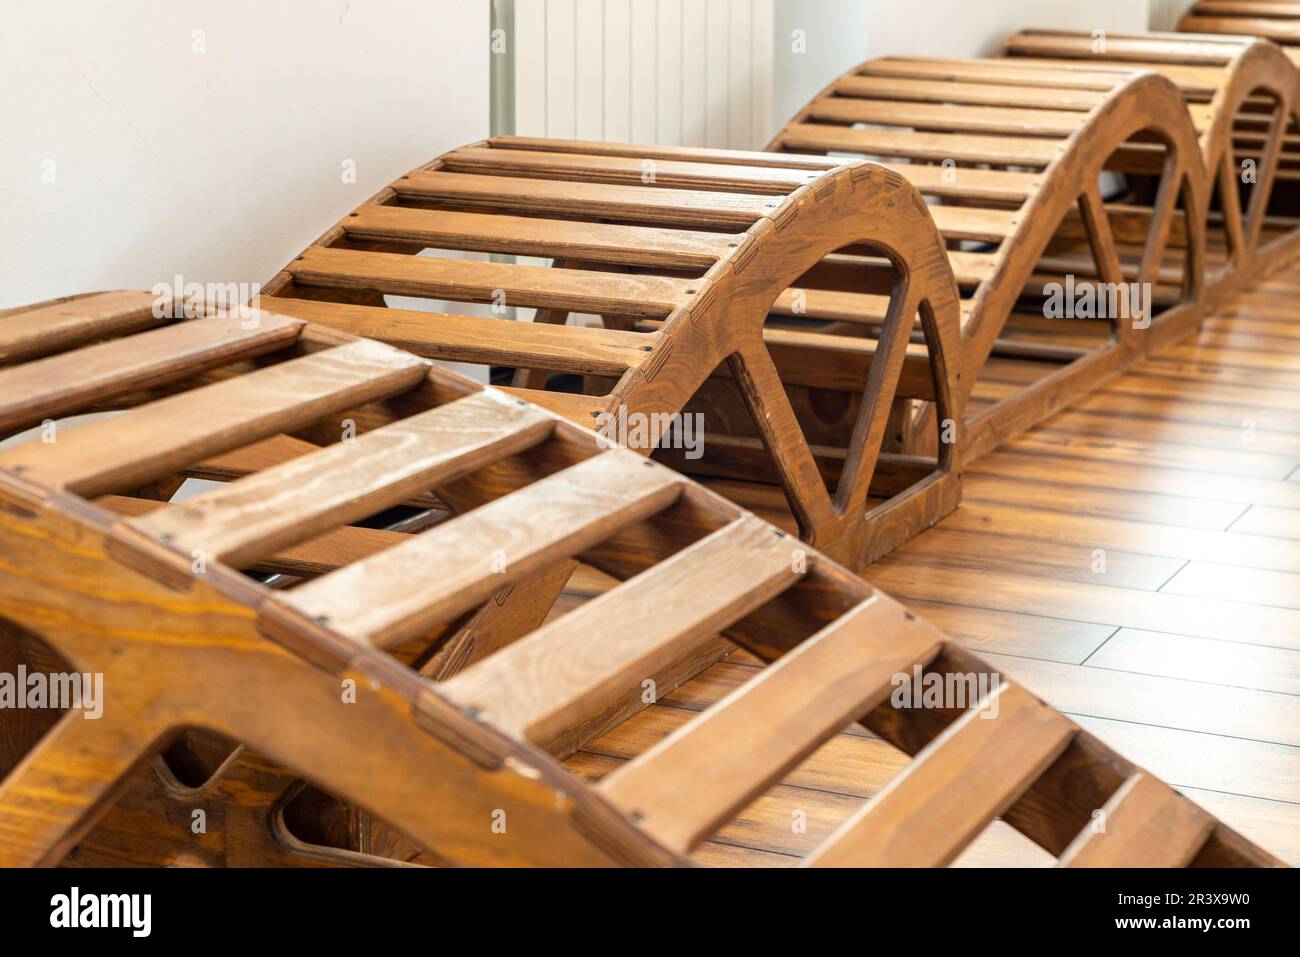 Interior of Gym with yoga wooden benches Stock Photo